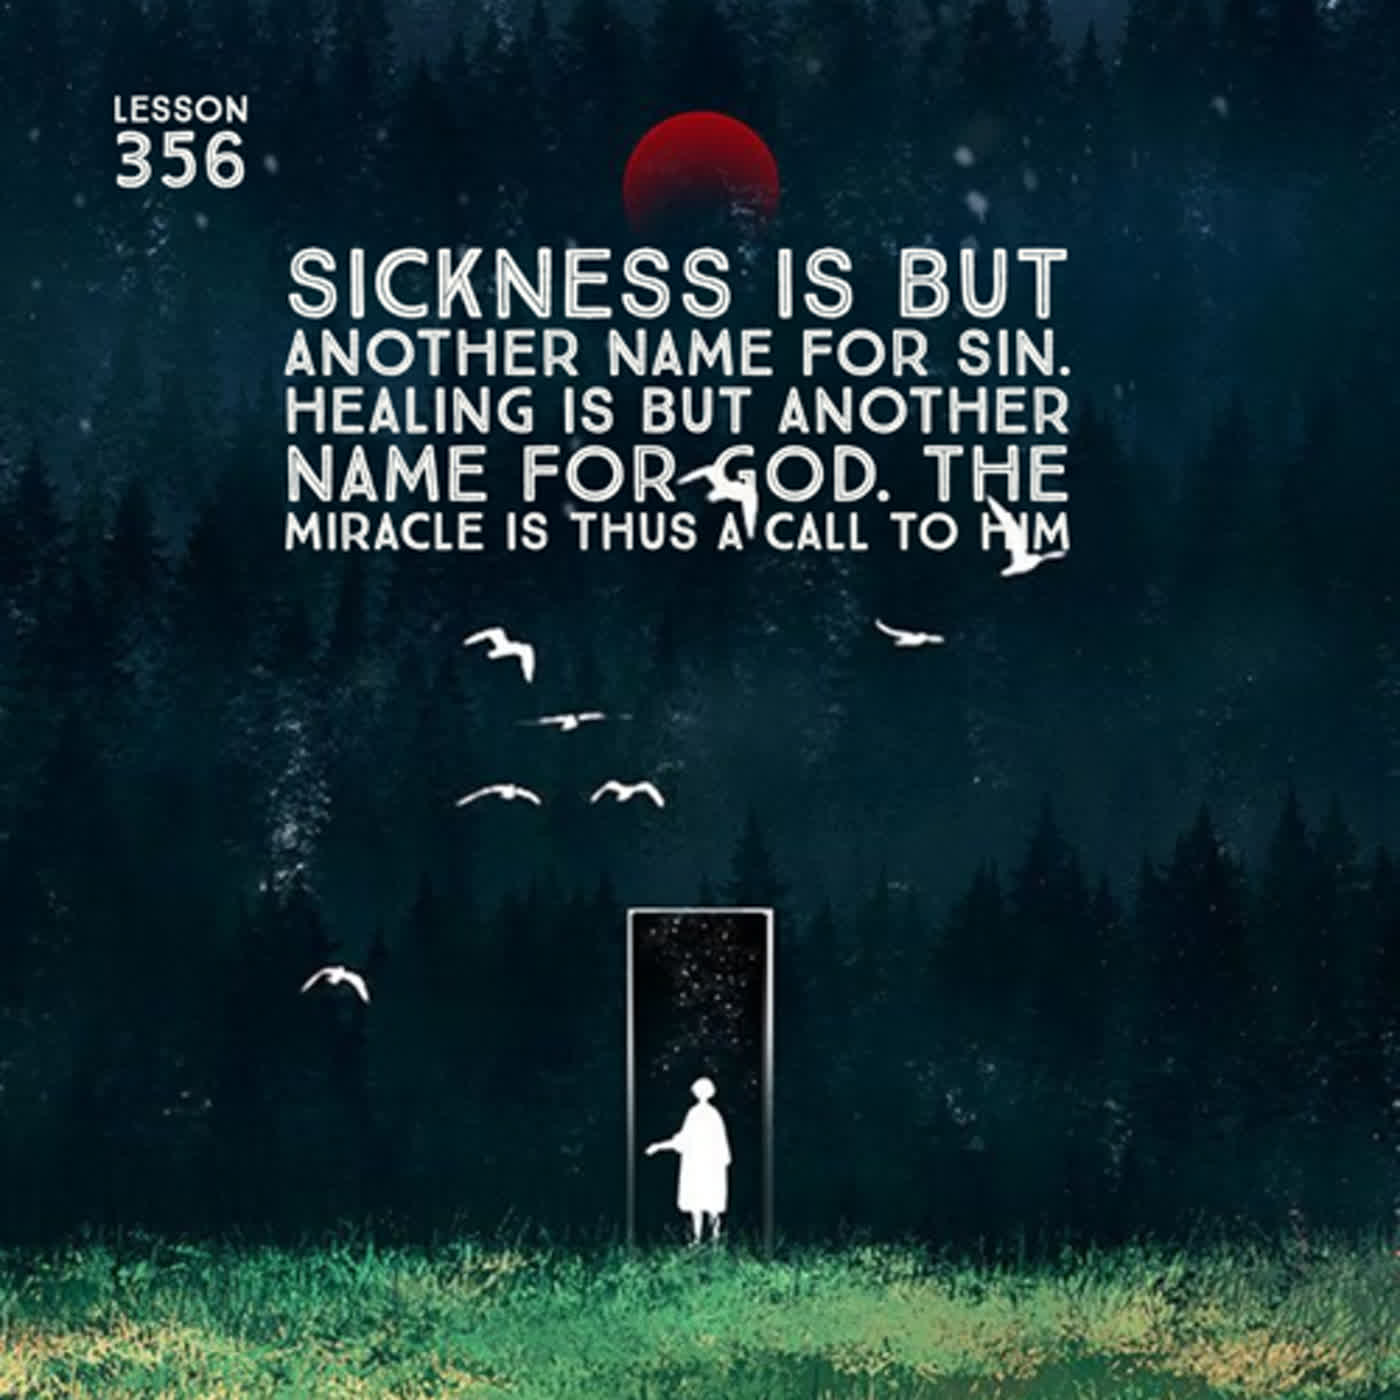 Lesson 356  Sickness is but another name for sin. Healing is but another name for God. The miracle is thus a call to Him